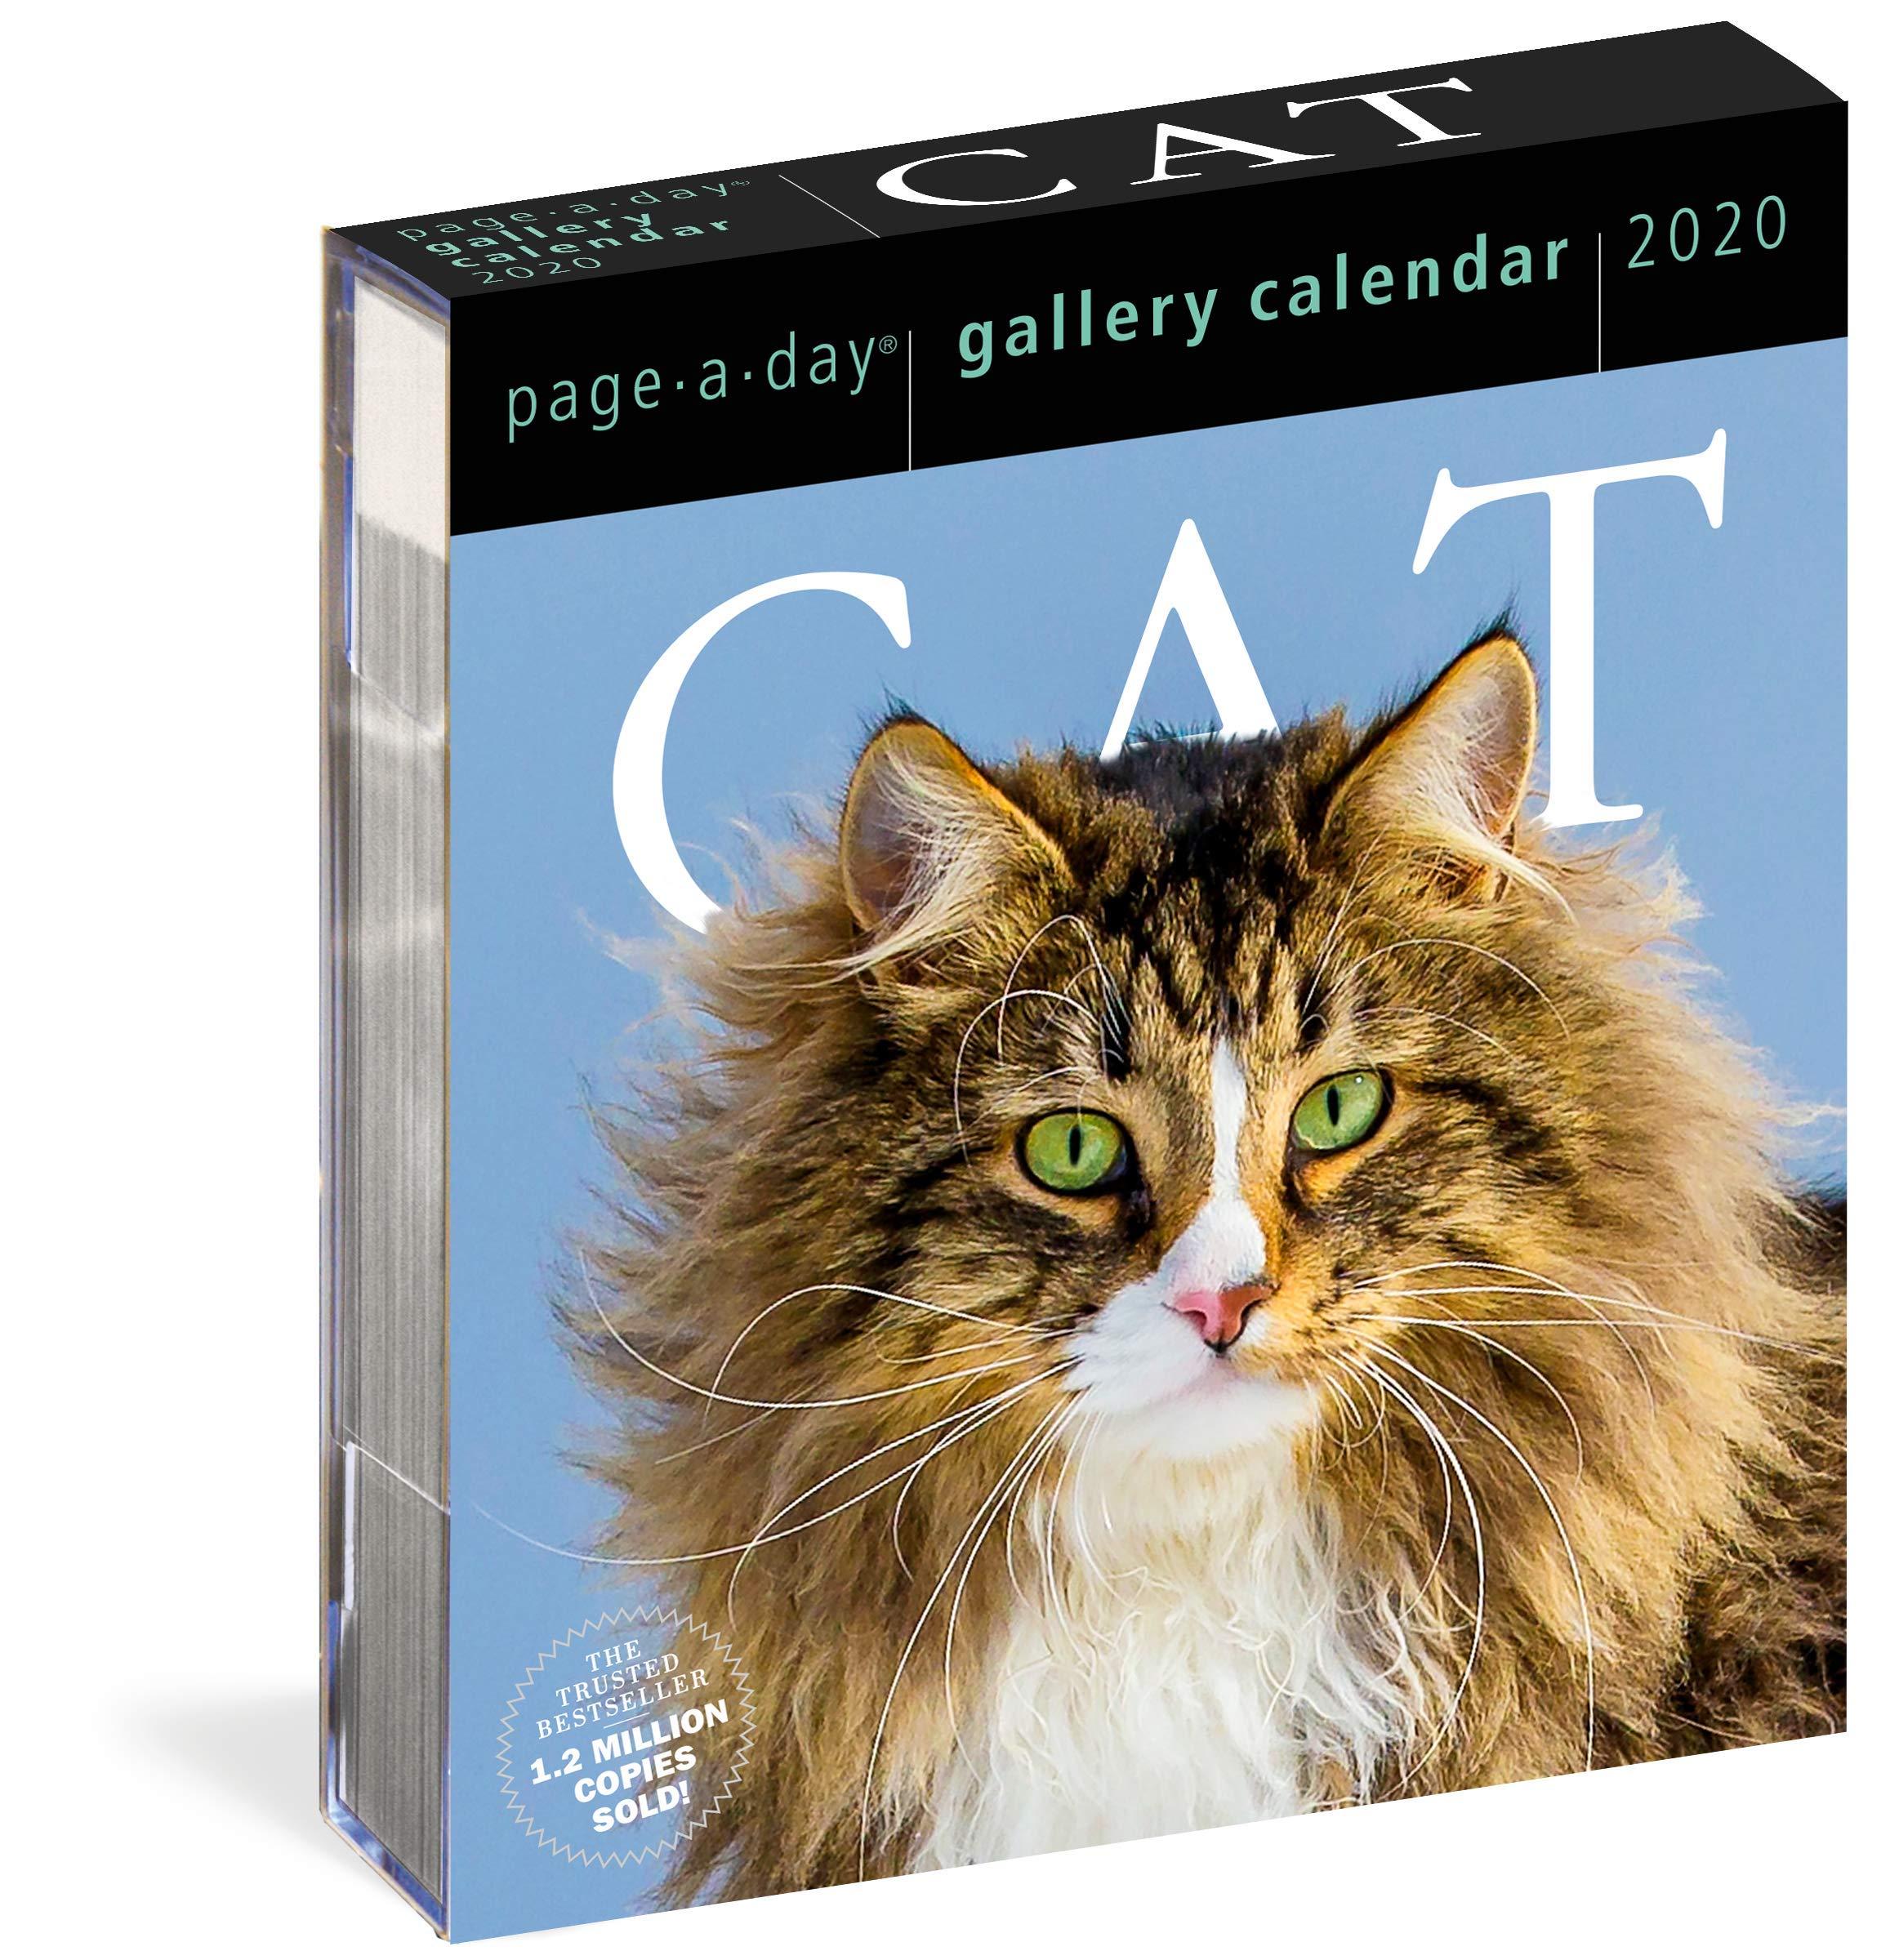 2020 Lauakalender Page-A-Day Gallery: Cat